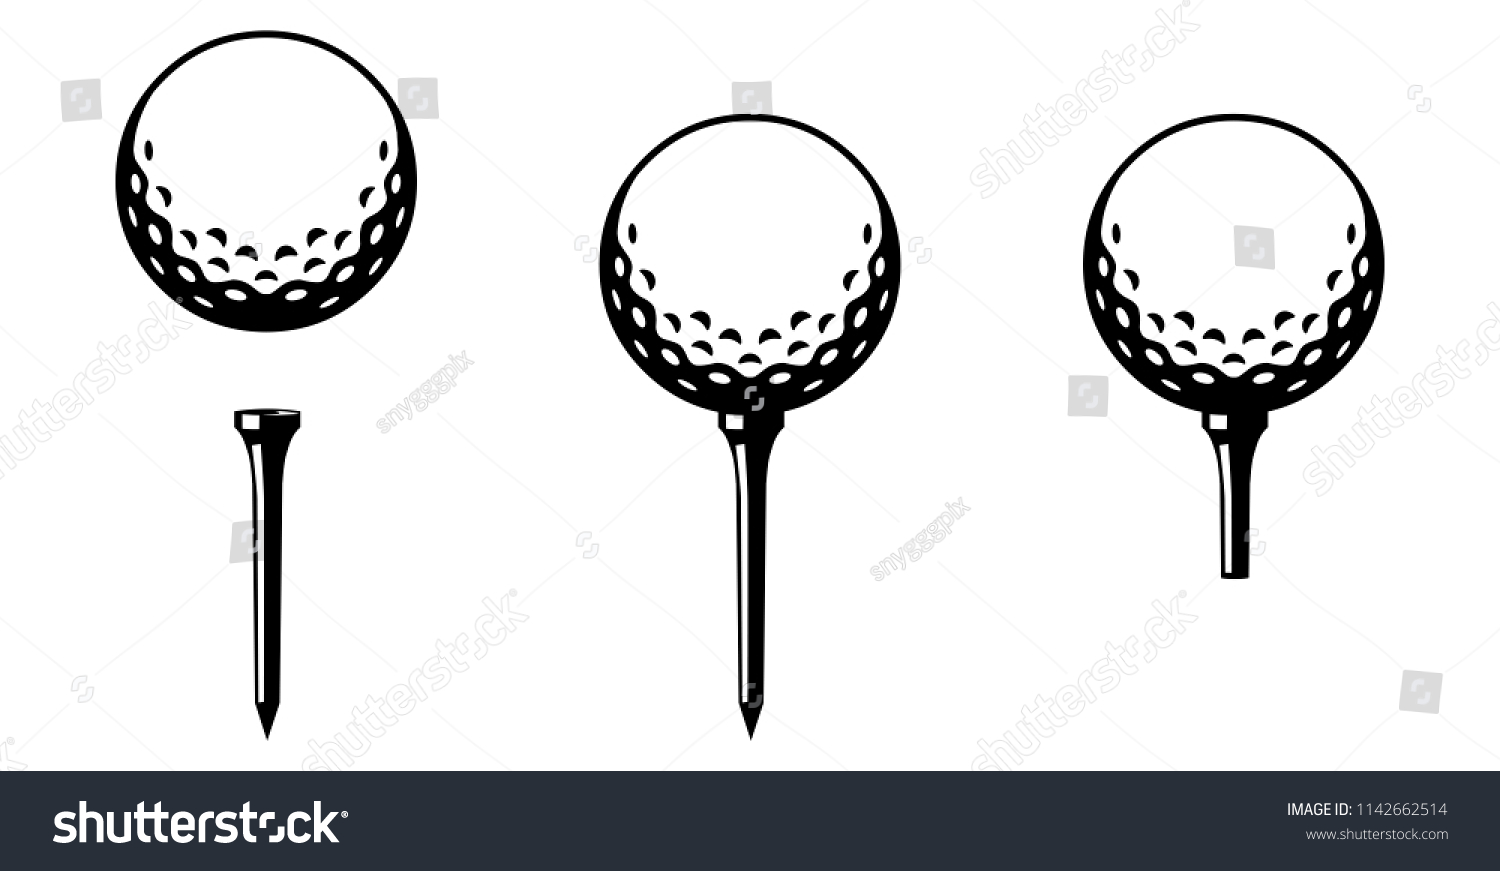 Set: Golf ball on tee – several versions / black and white / vector / icon #1142662514